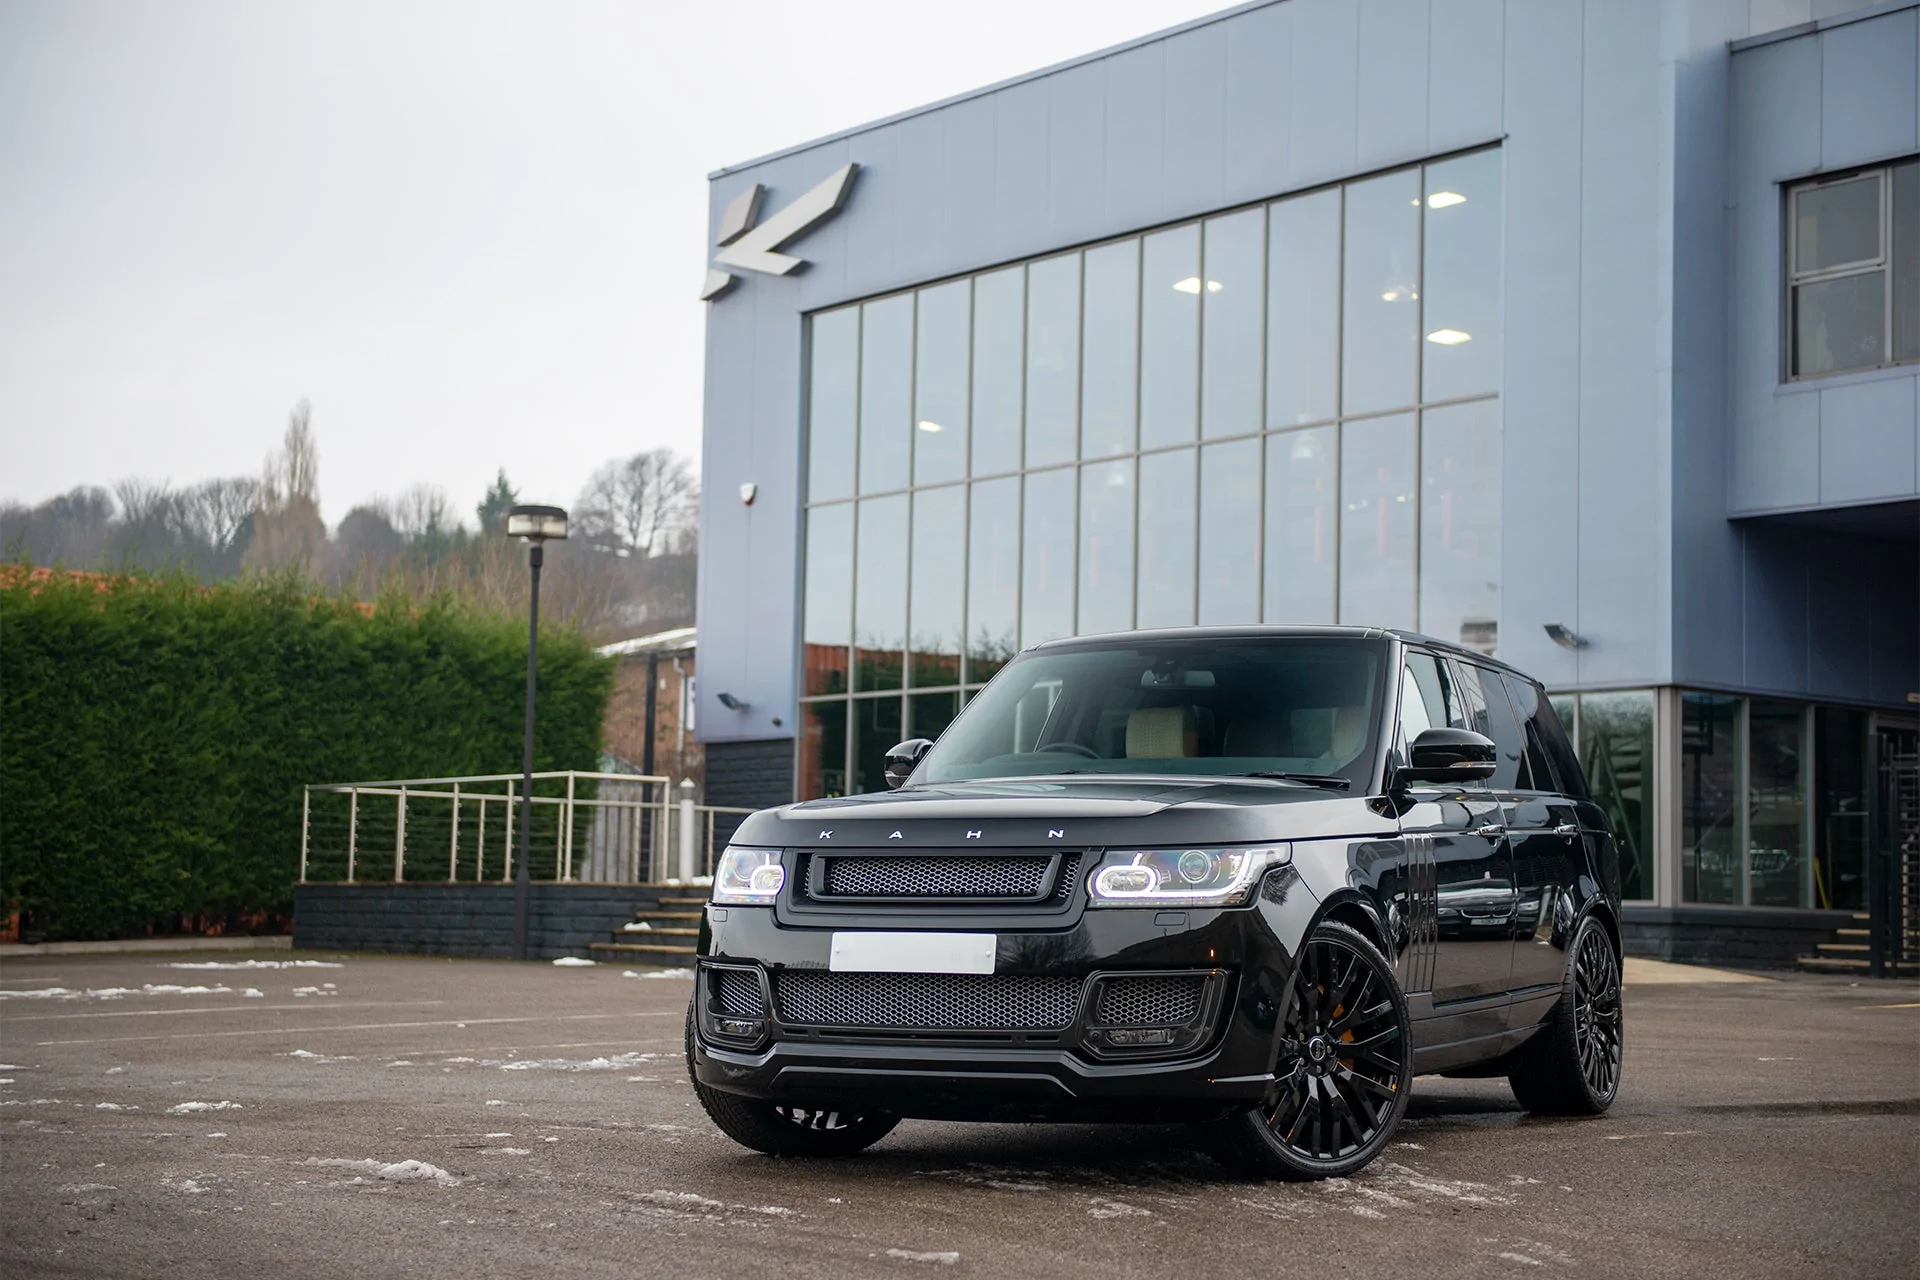 Check our price and buy Kahn Design body kit for Land Rover Range Rover Vogue  LE!